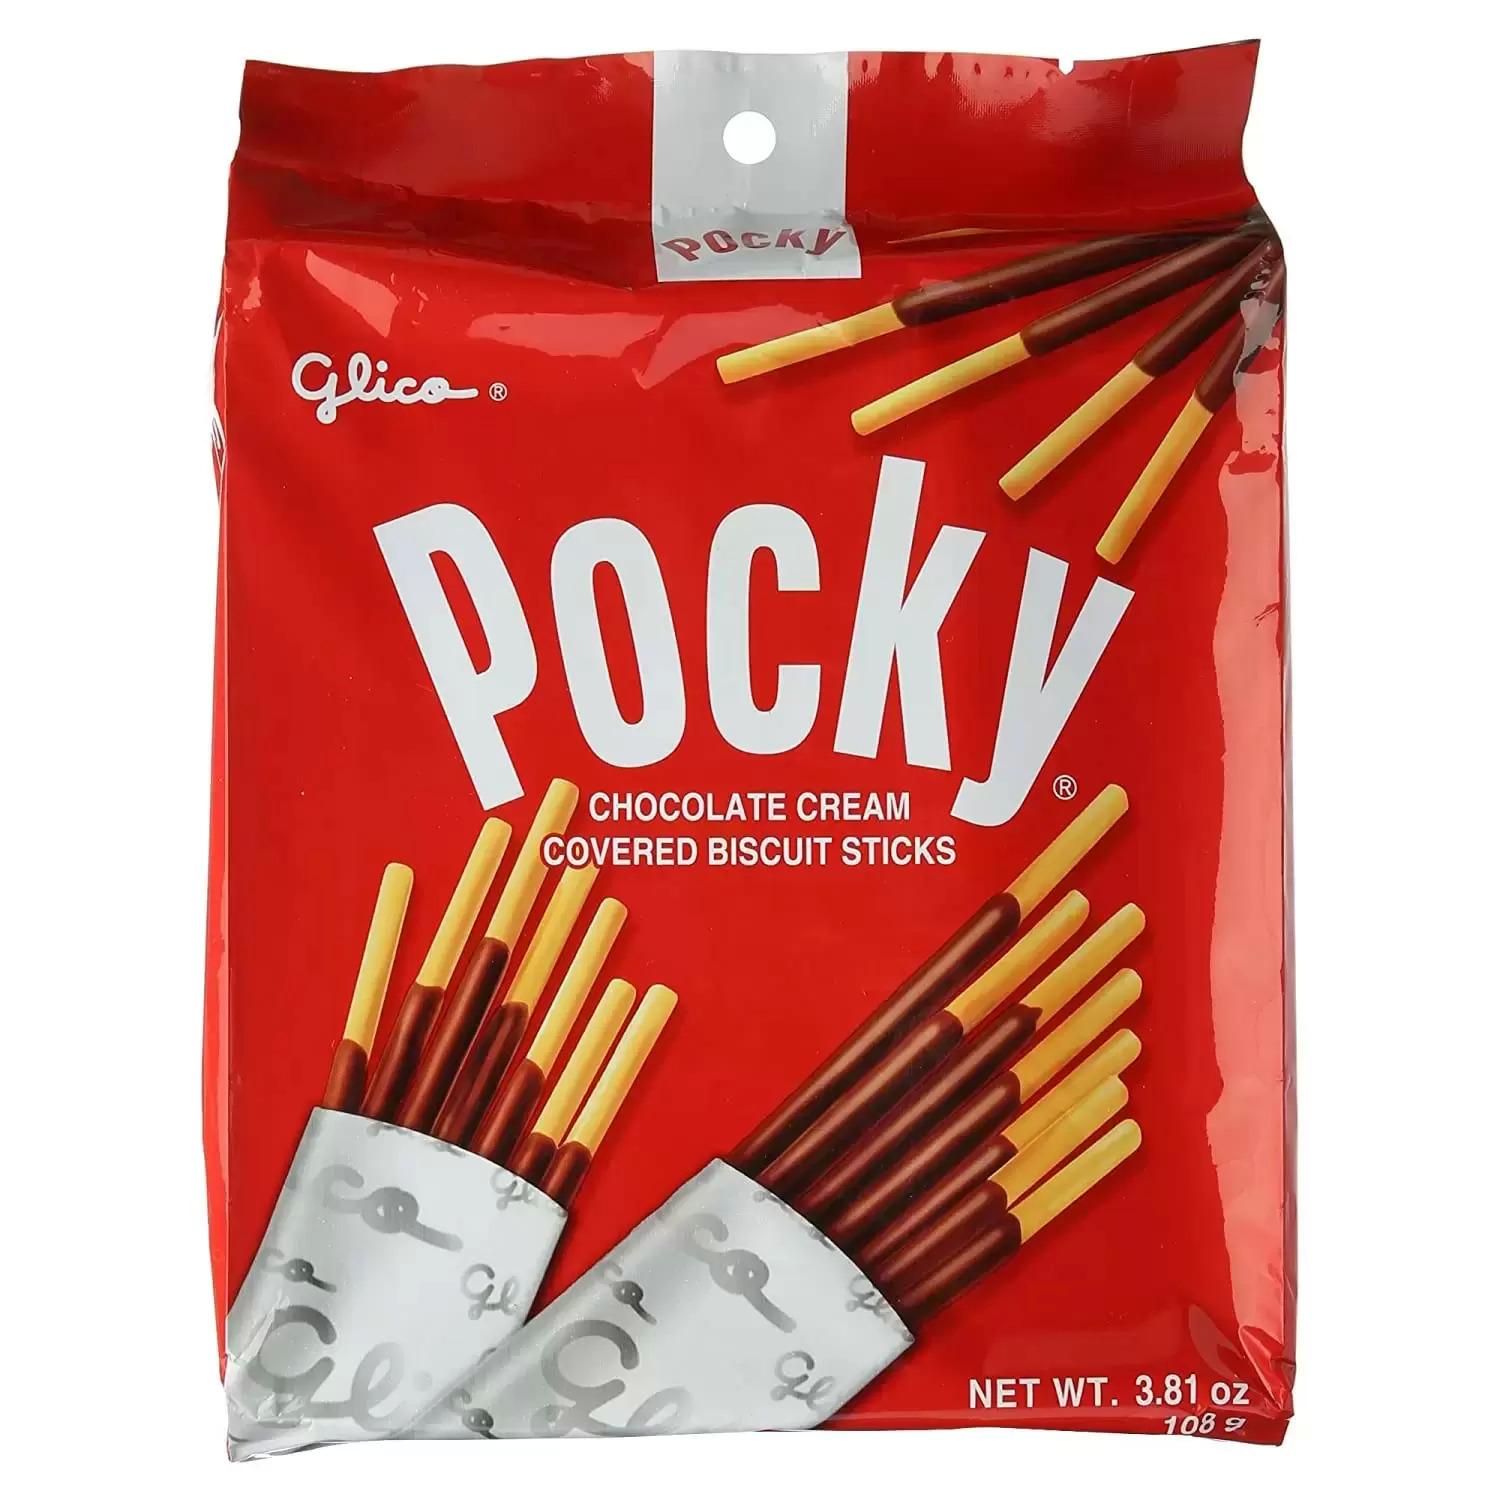 Glico Pocky Chocolate Cream Covered Biscuit Sticks for $3.51 Shipped